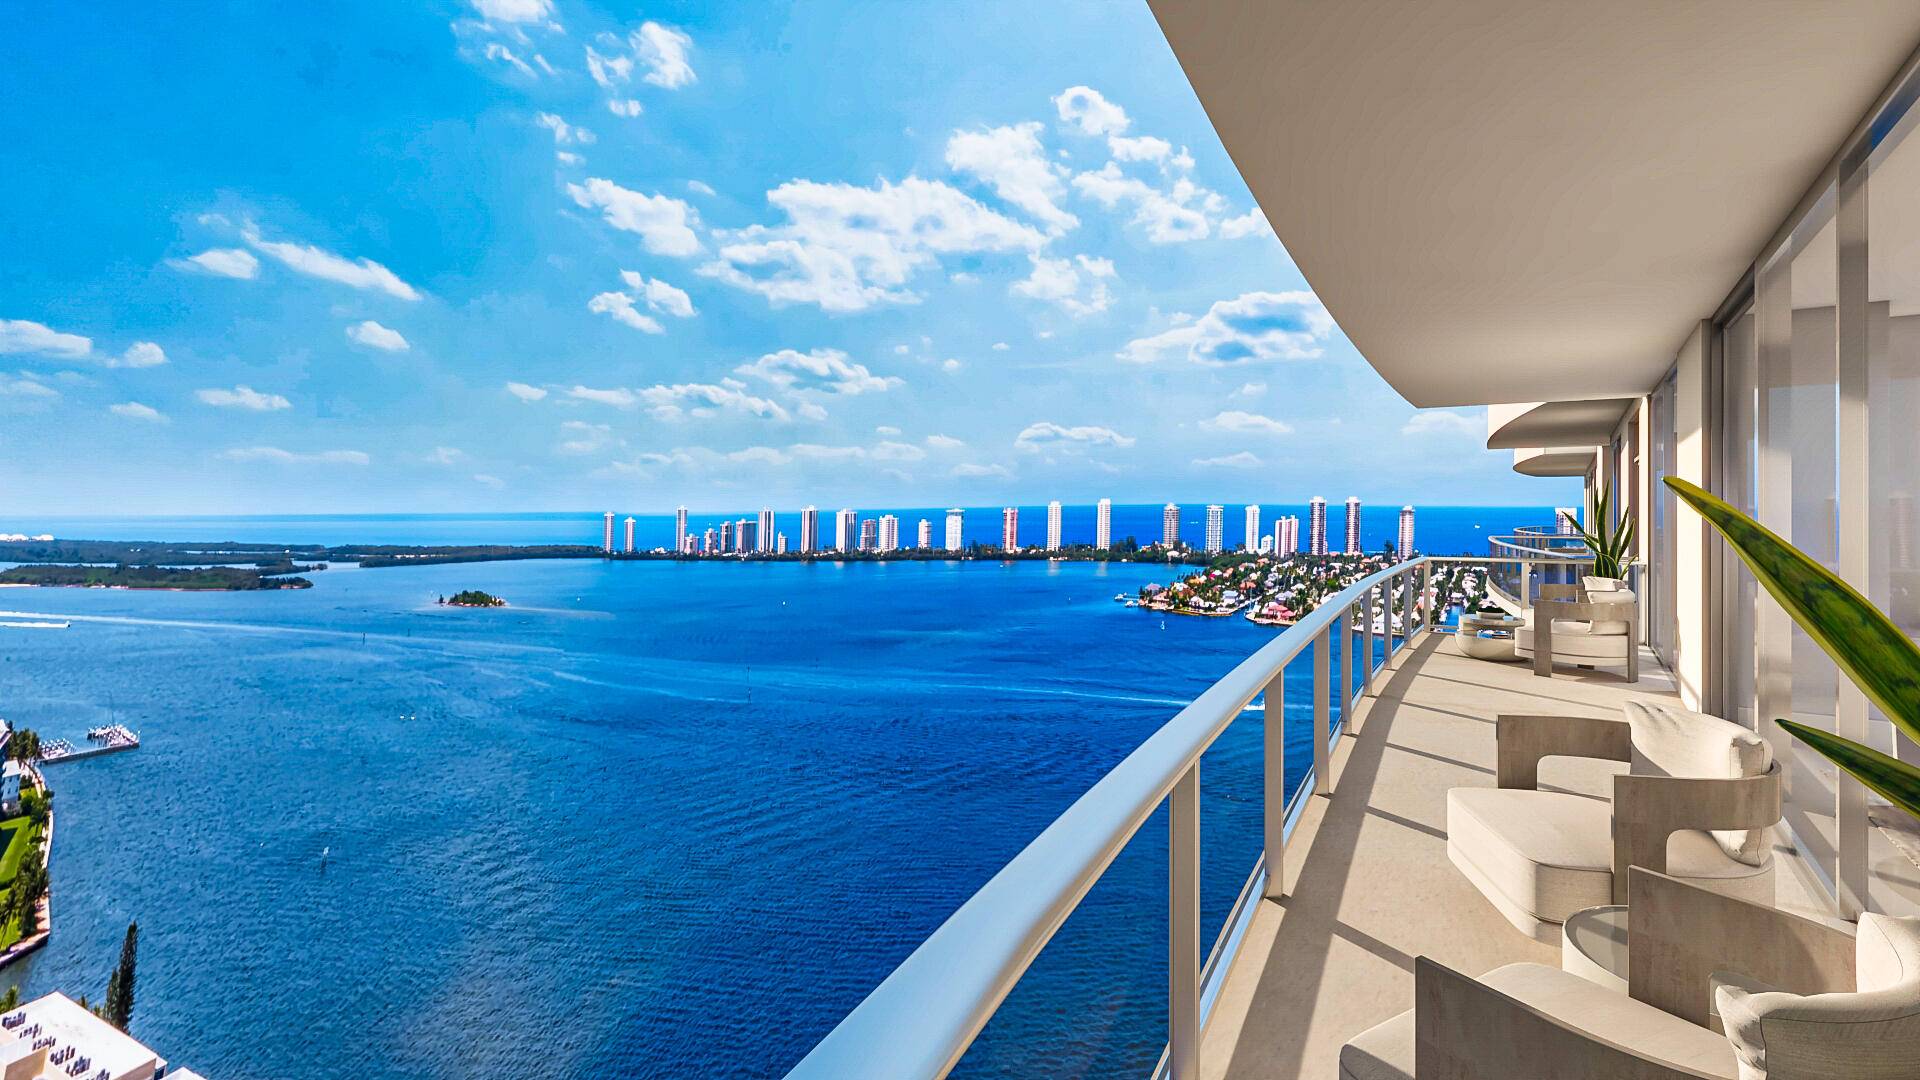 Nautilus 220 is a new luxe waterfront development under construction alongside a marina with 330 condominium residences in two, 24 story towers, a one acre outdoor amenity deck, the SeaHawk ...